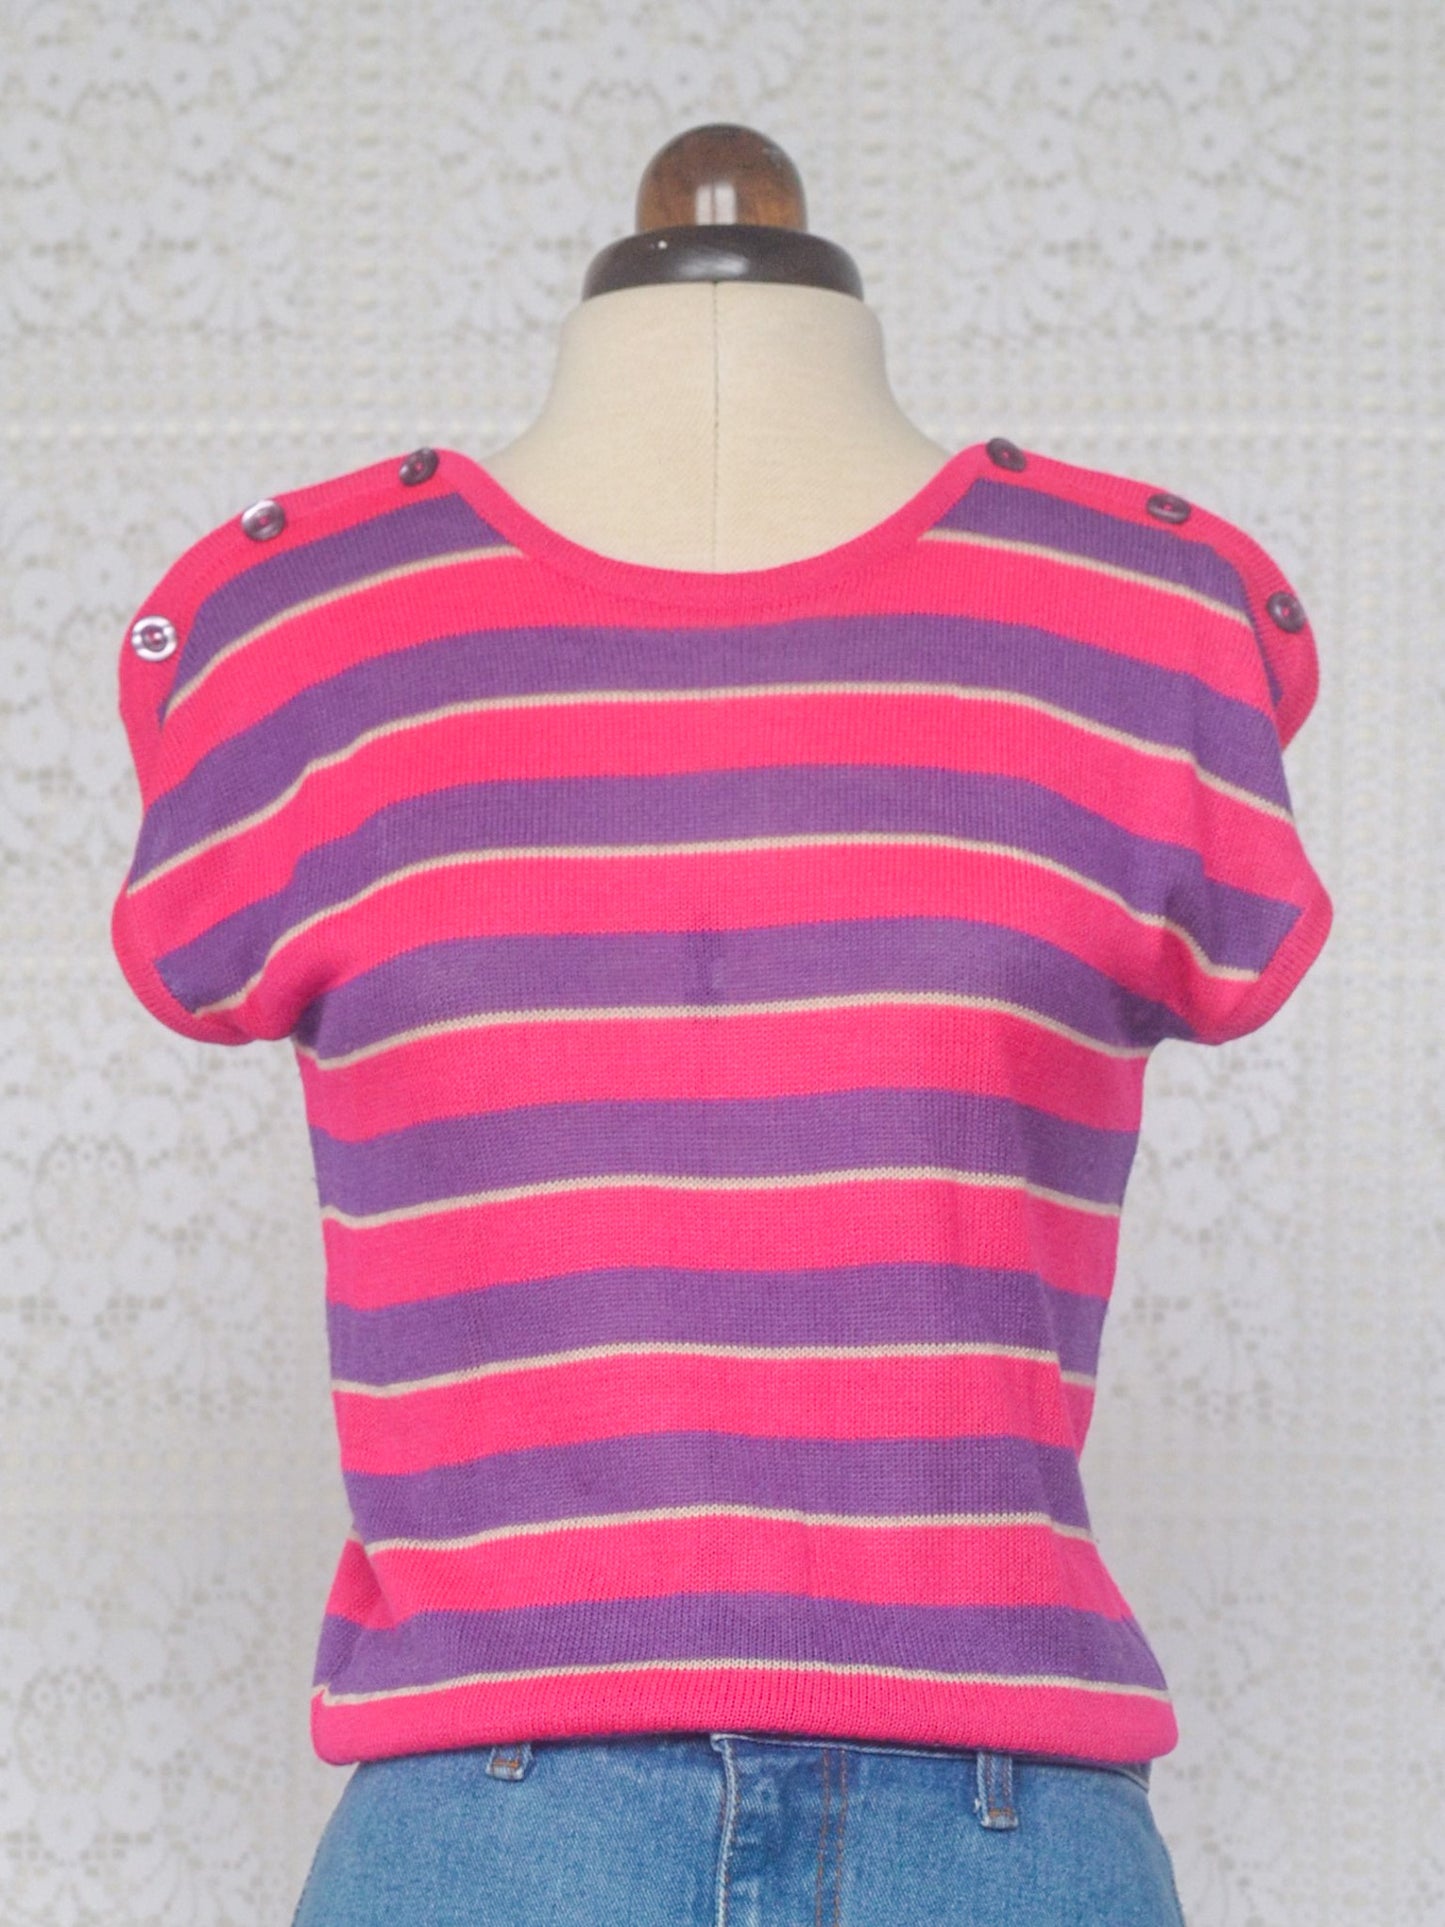 1980s style bright pink and purple cap sleeve jumper